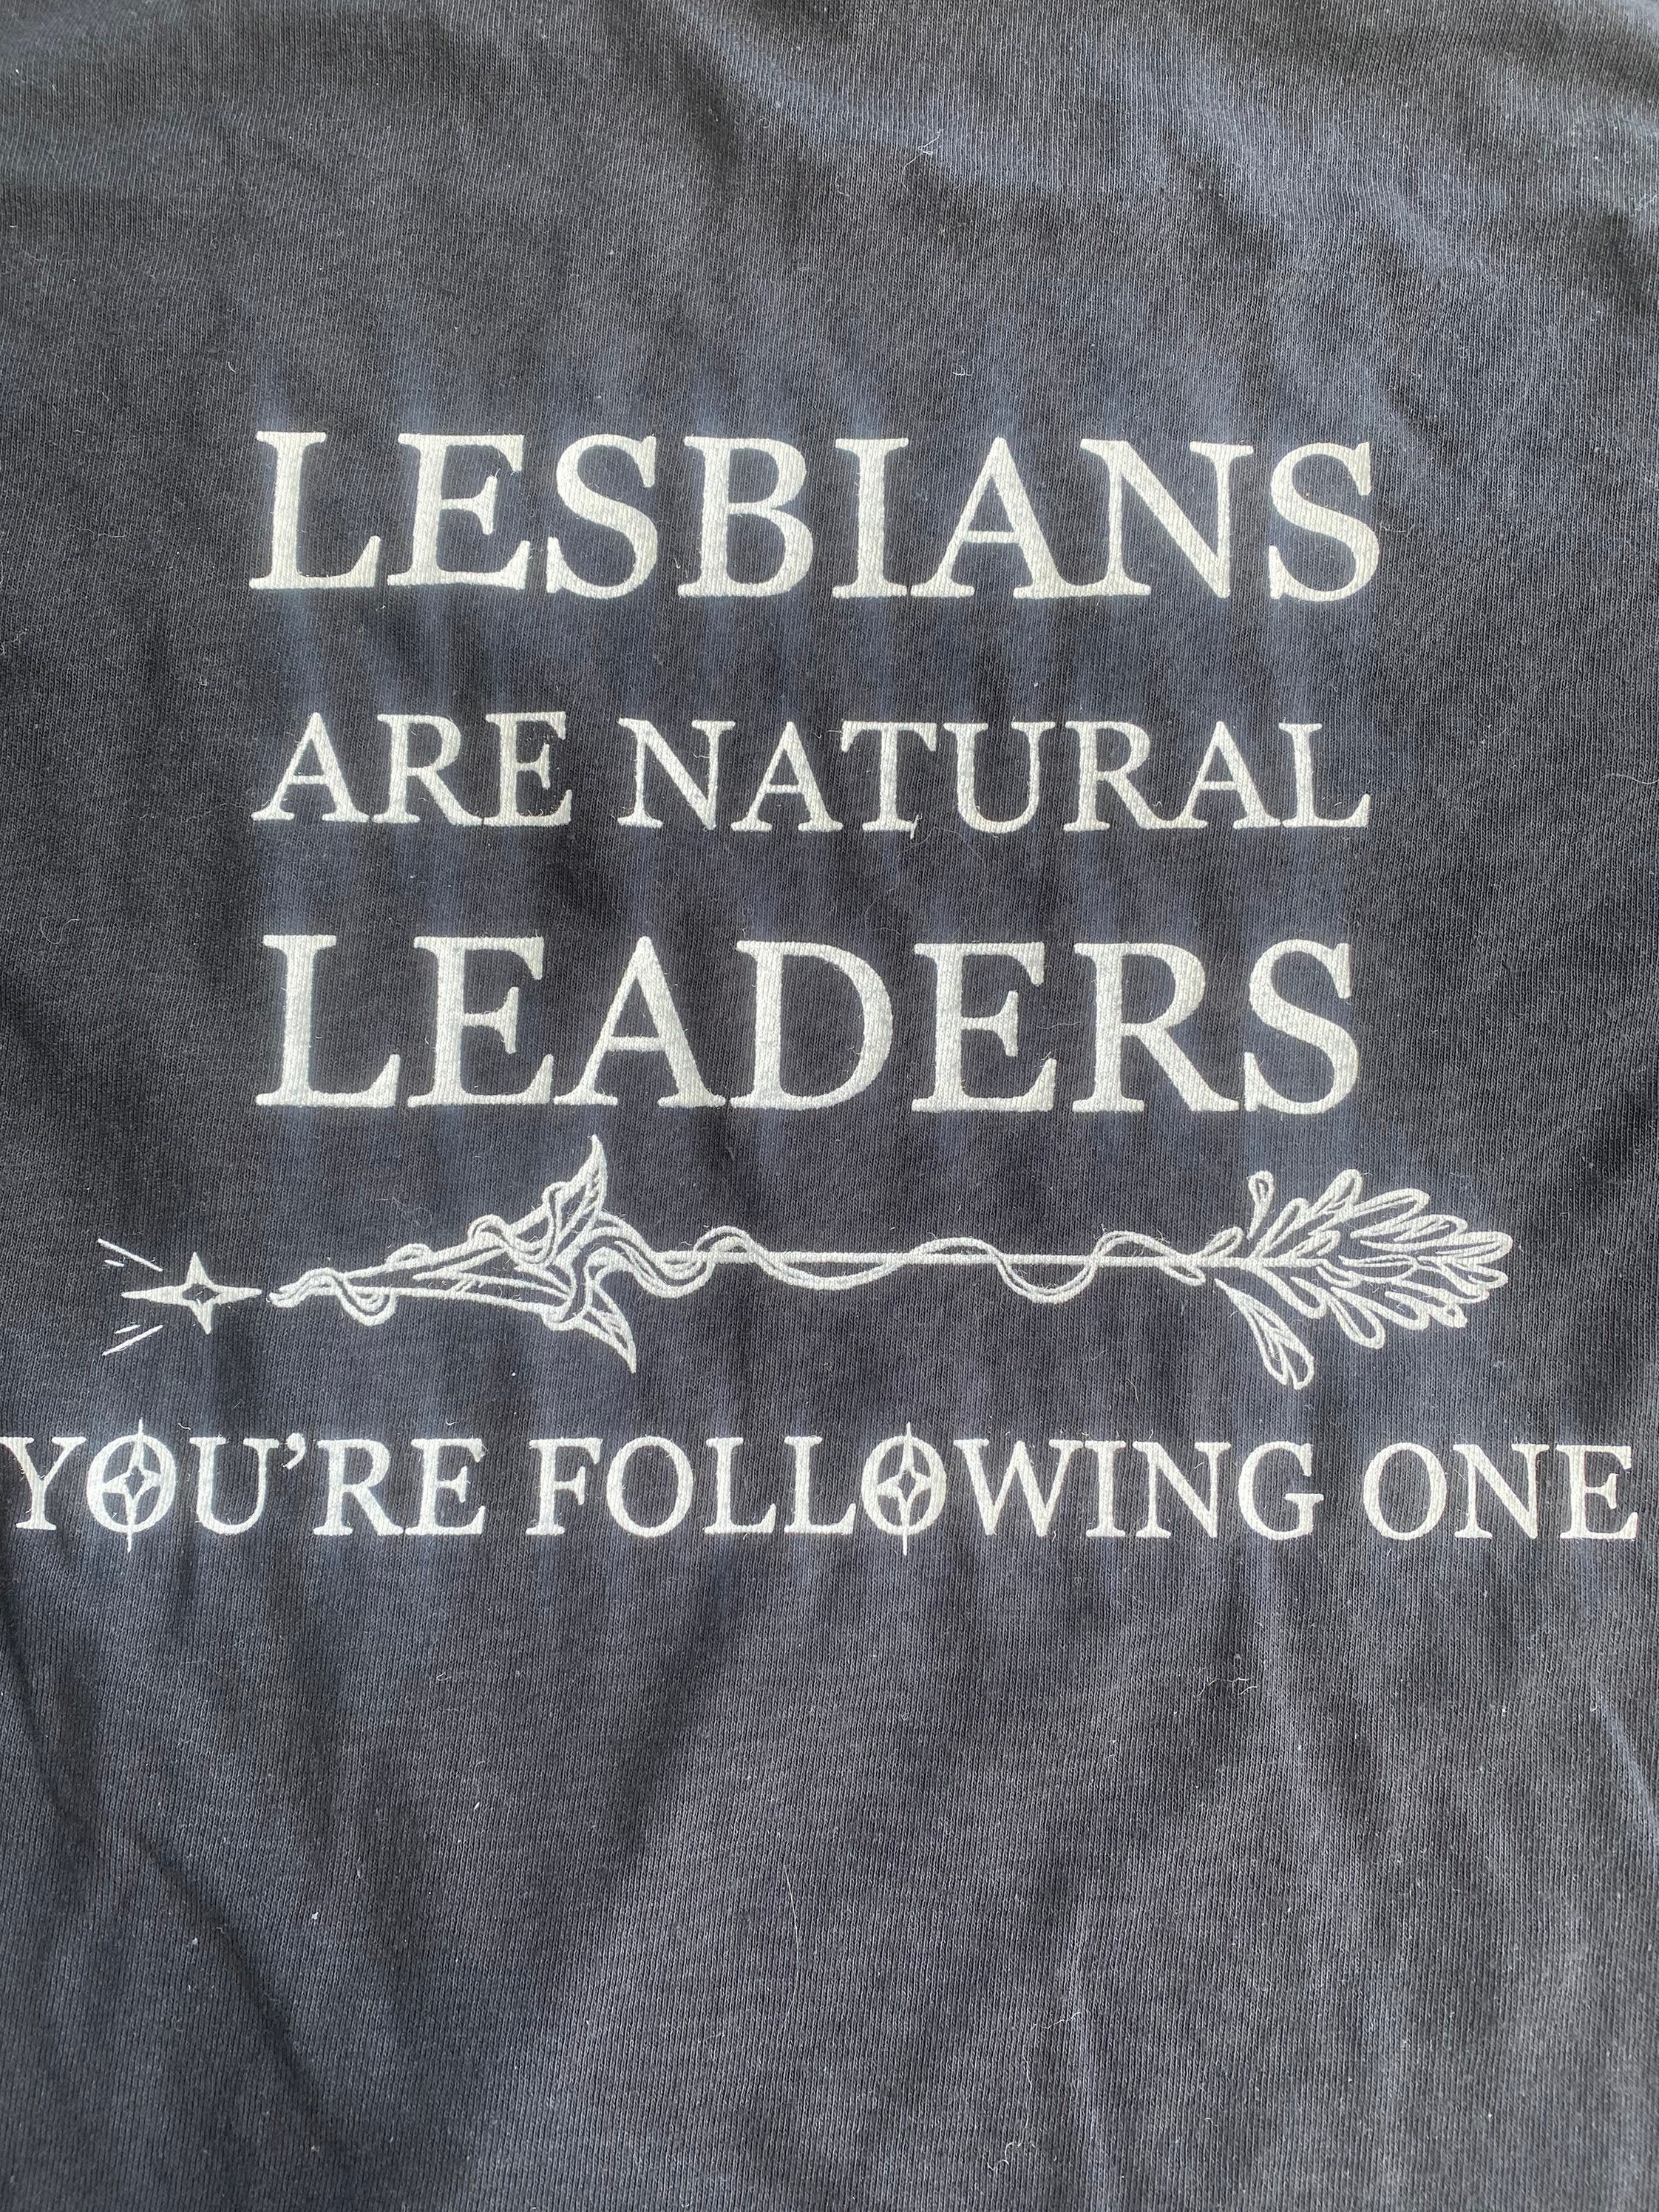 lesbians are natural leaders t shirt